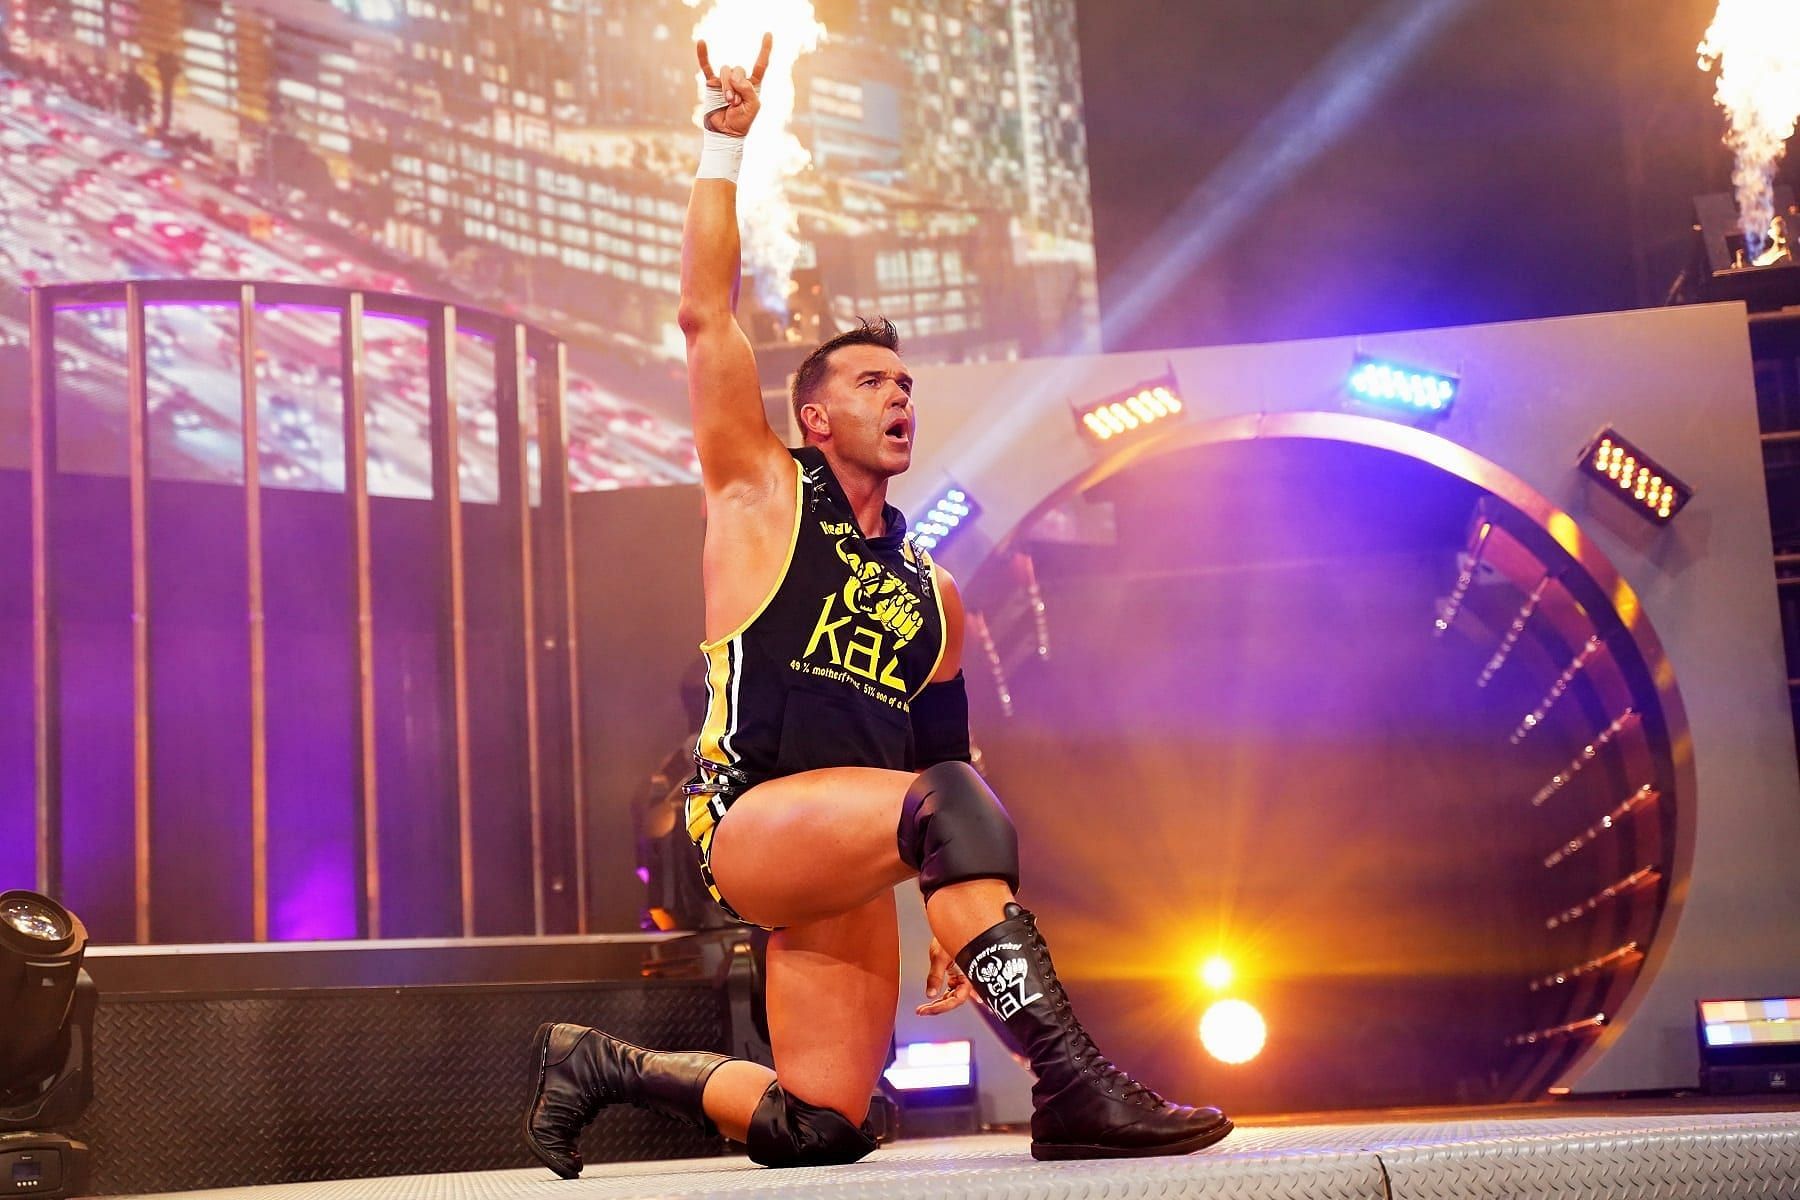 Frankie Kazarian is also known as &quot;The Elite Hunter.&quot;